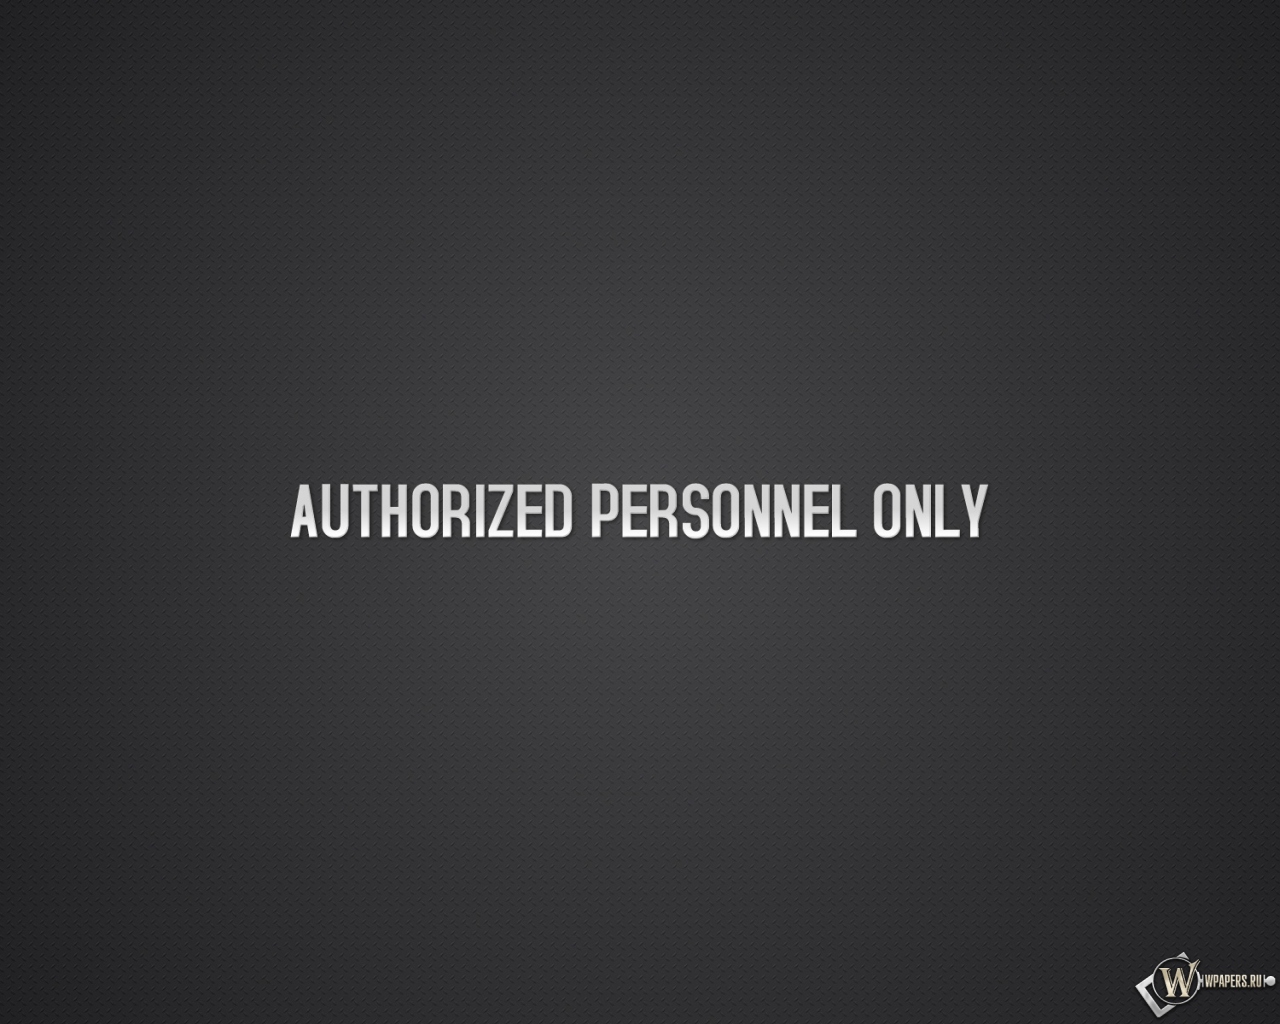 Authorized personnel only 1280x1024